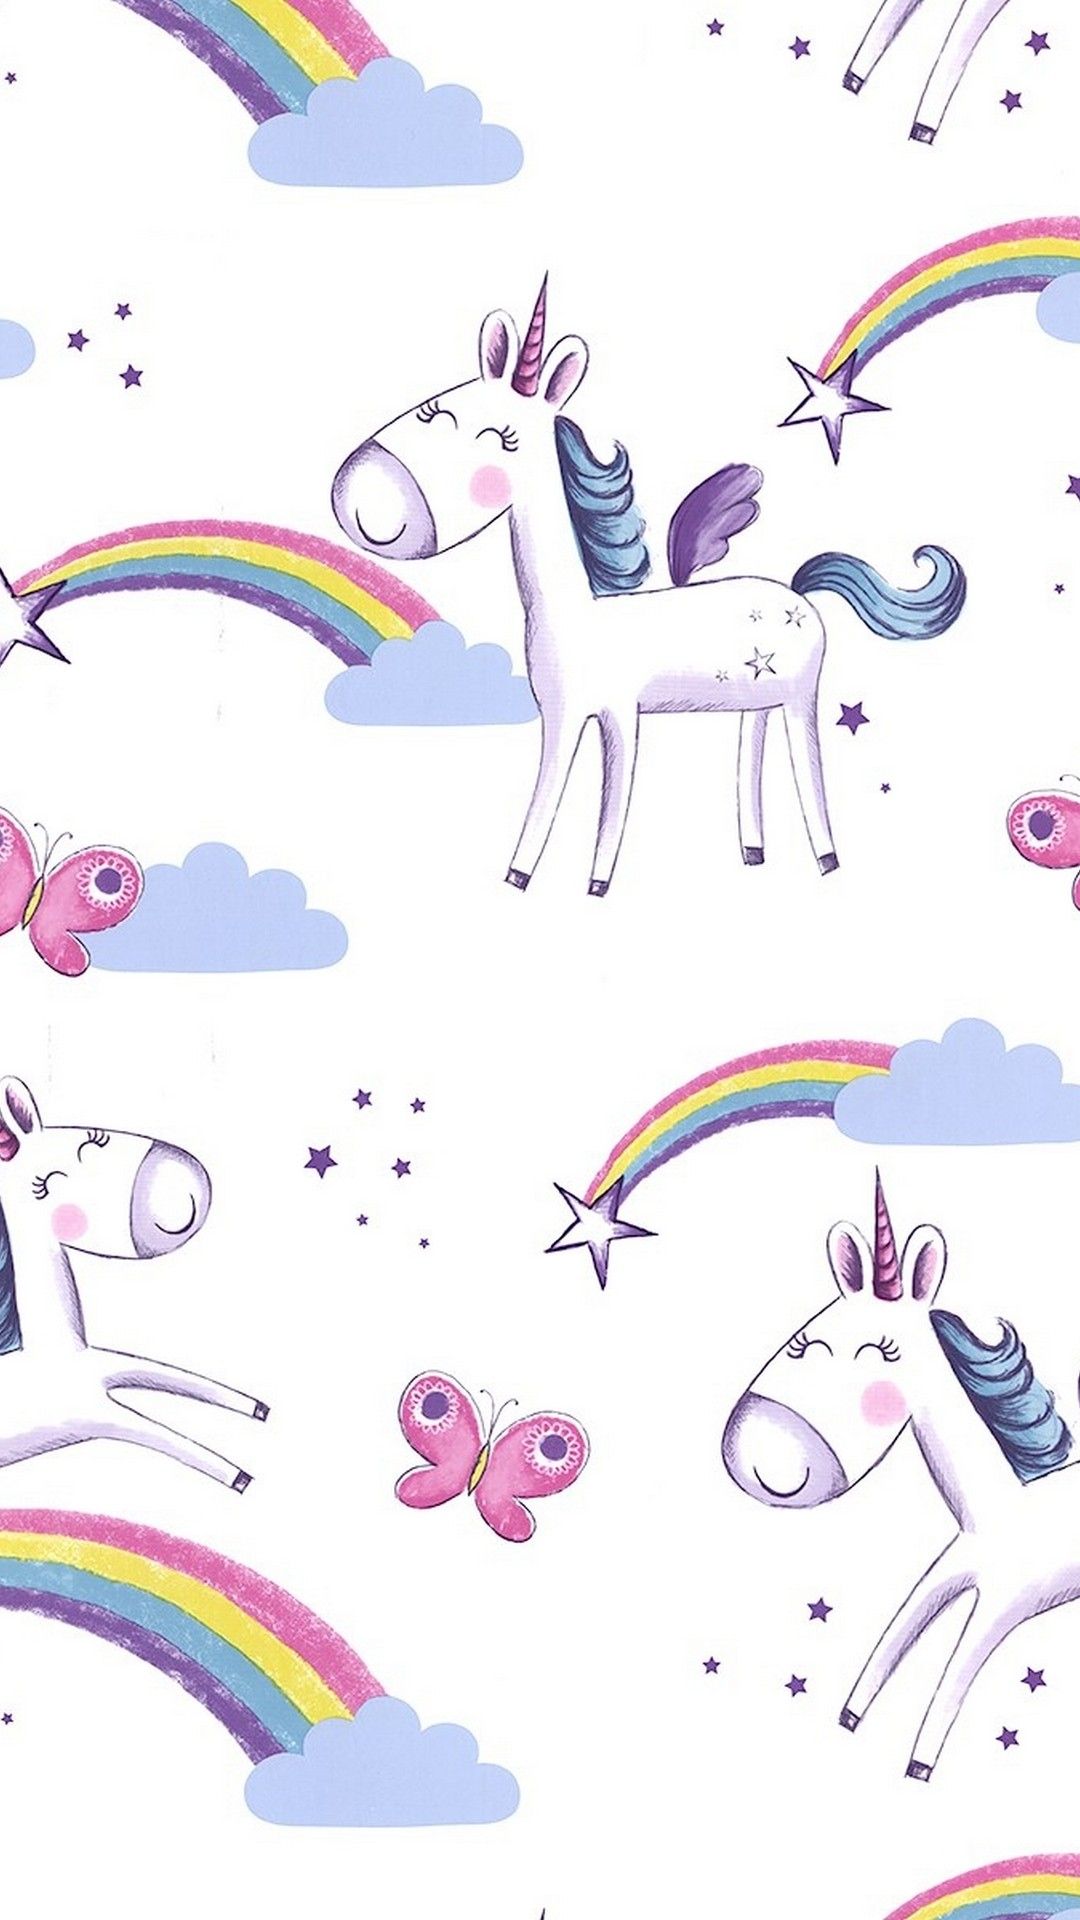 Android Wallpaper Cute Girly Unicorn Android Wallpaper